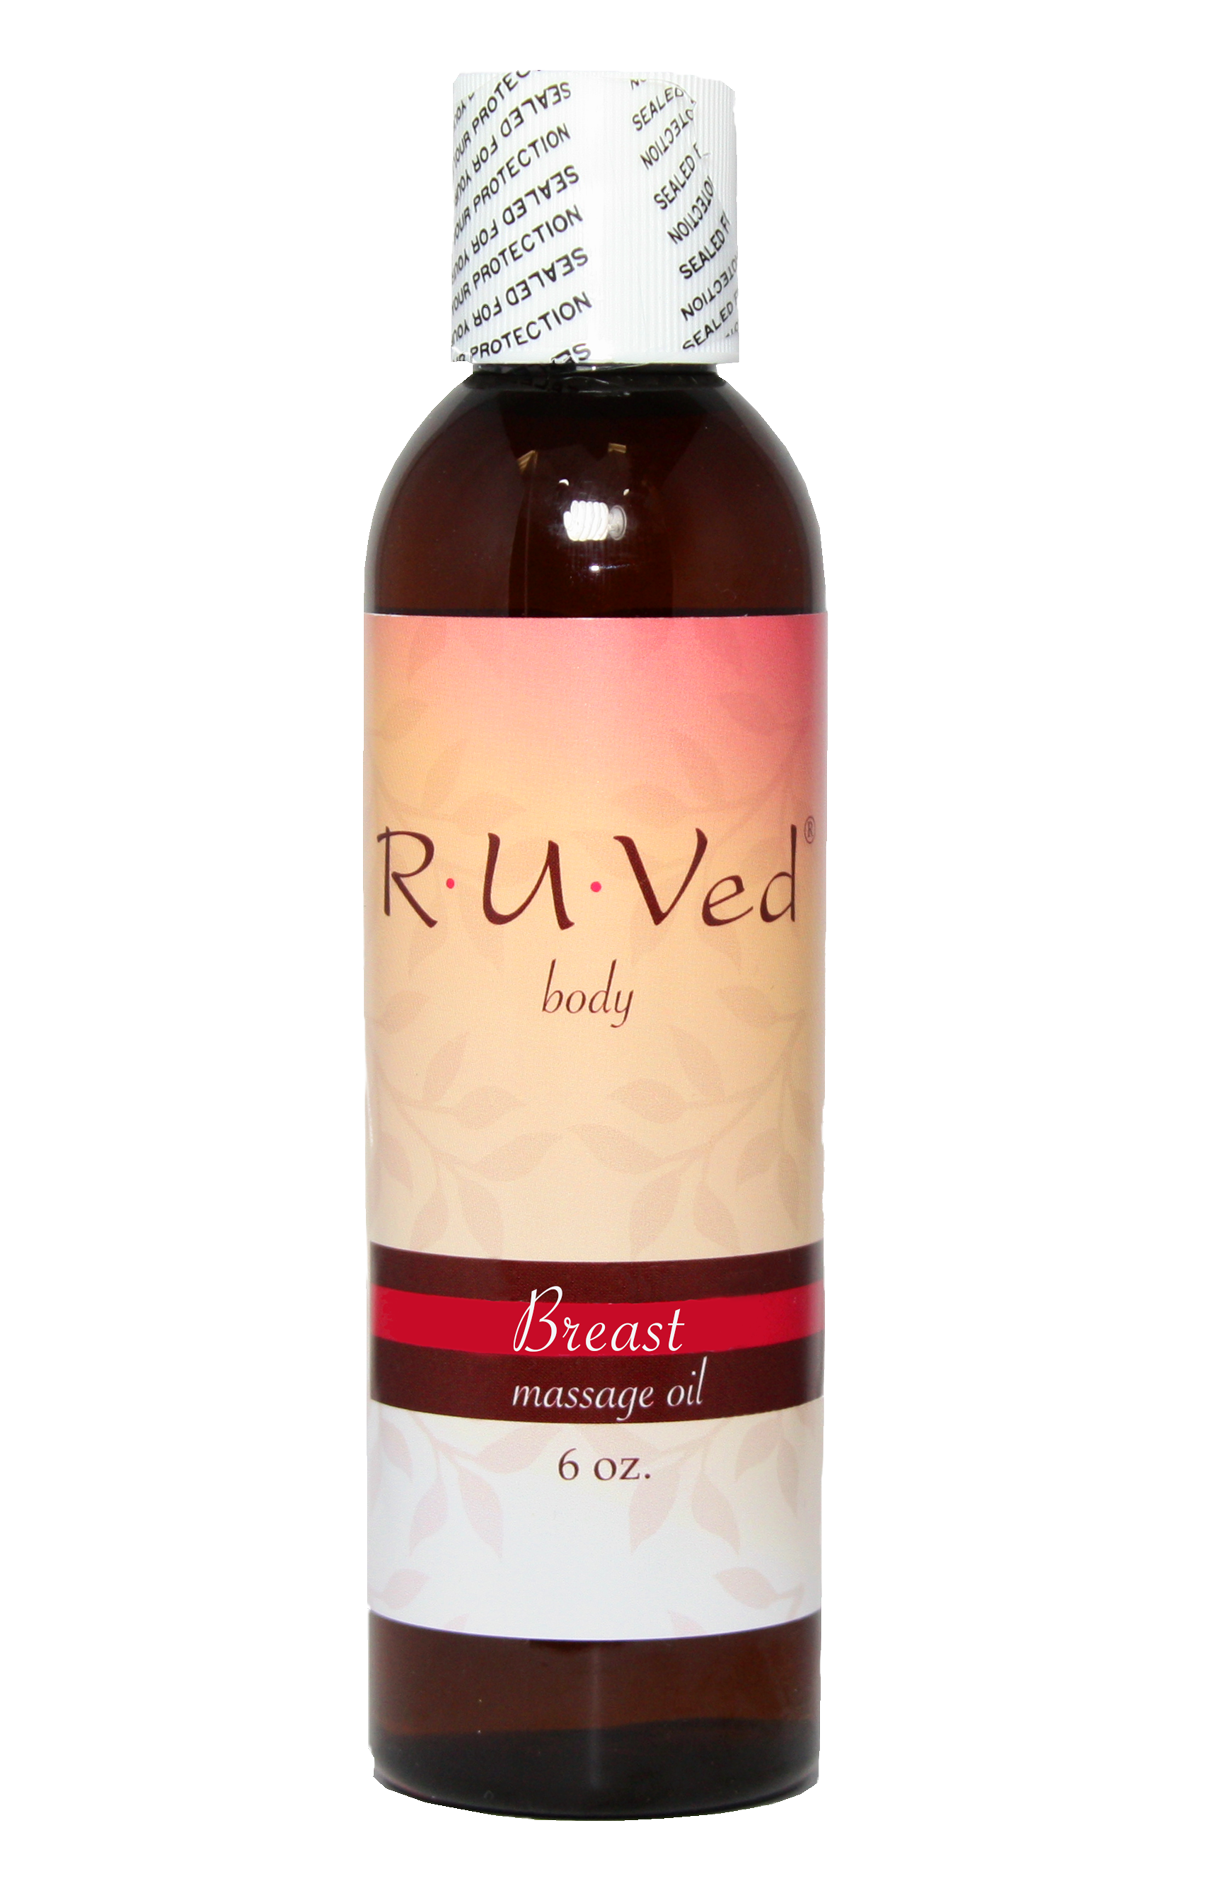 Ruved Breast Massage Oil bottle front 